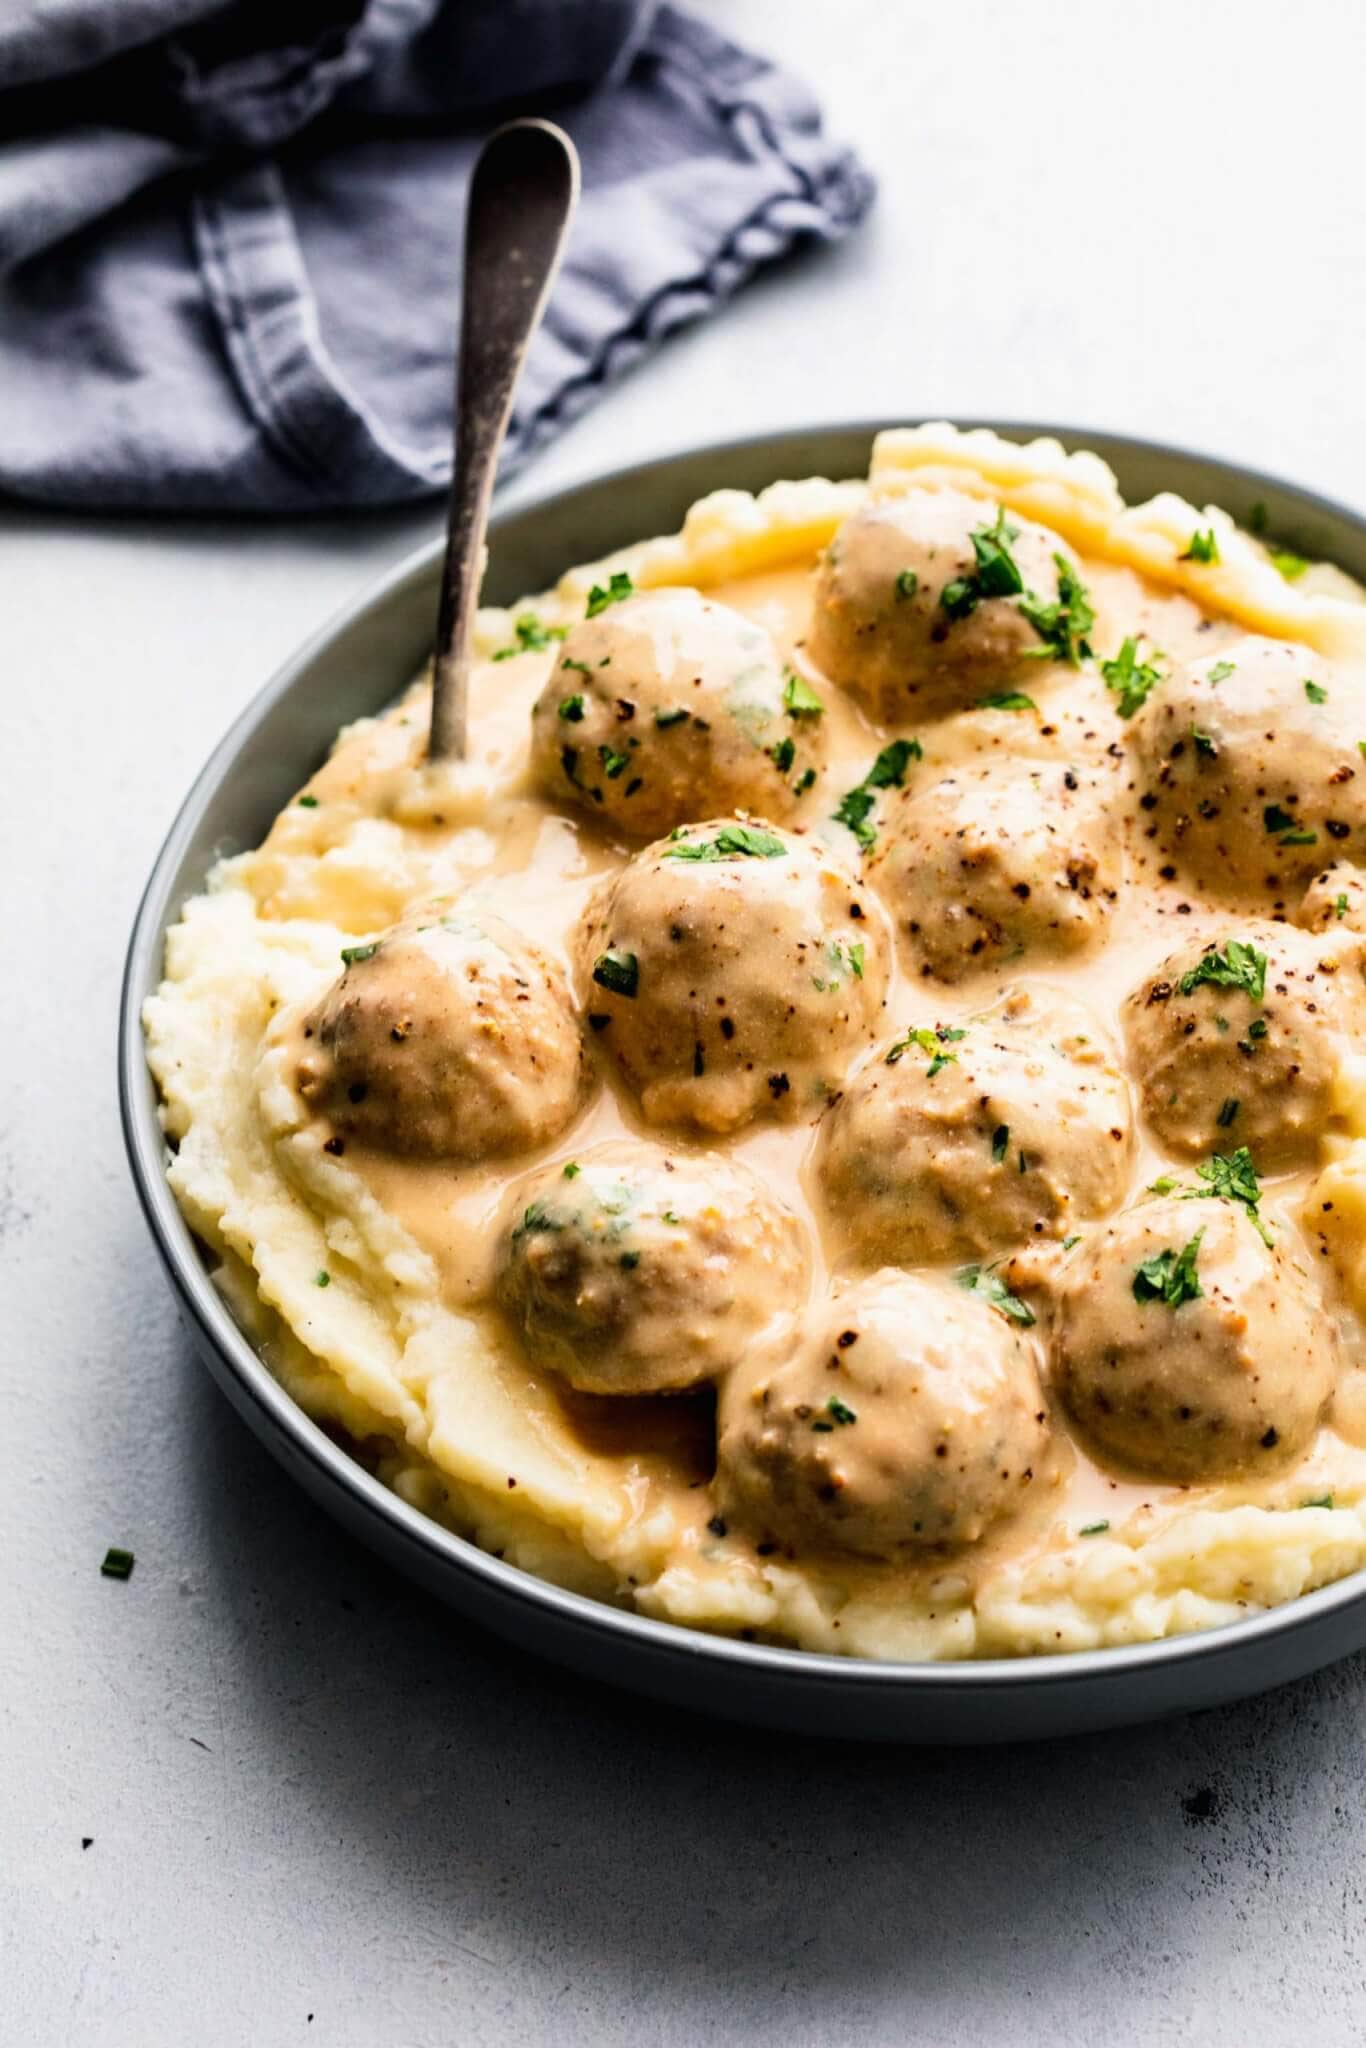 Side view of bowl of turkey swedish meatballs served on top of mashed potatoes.